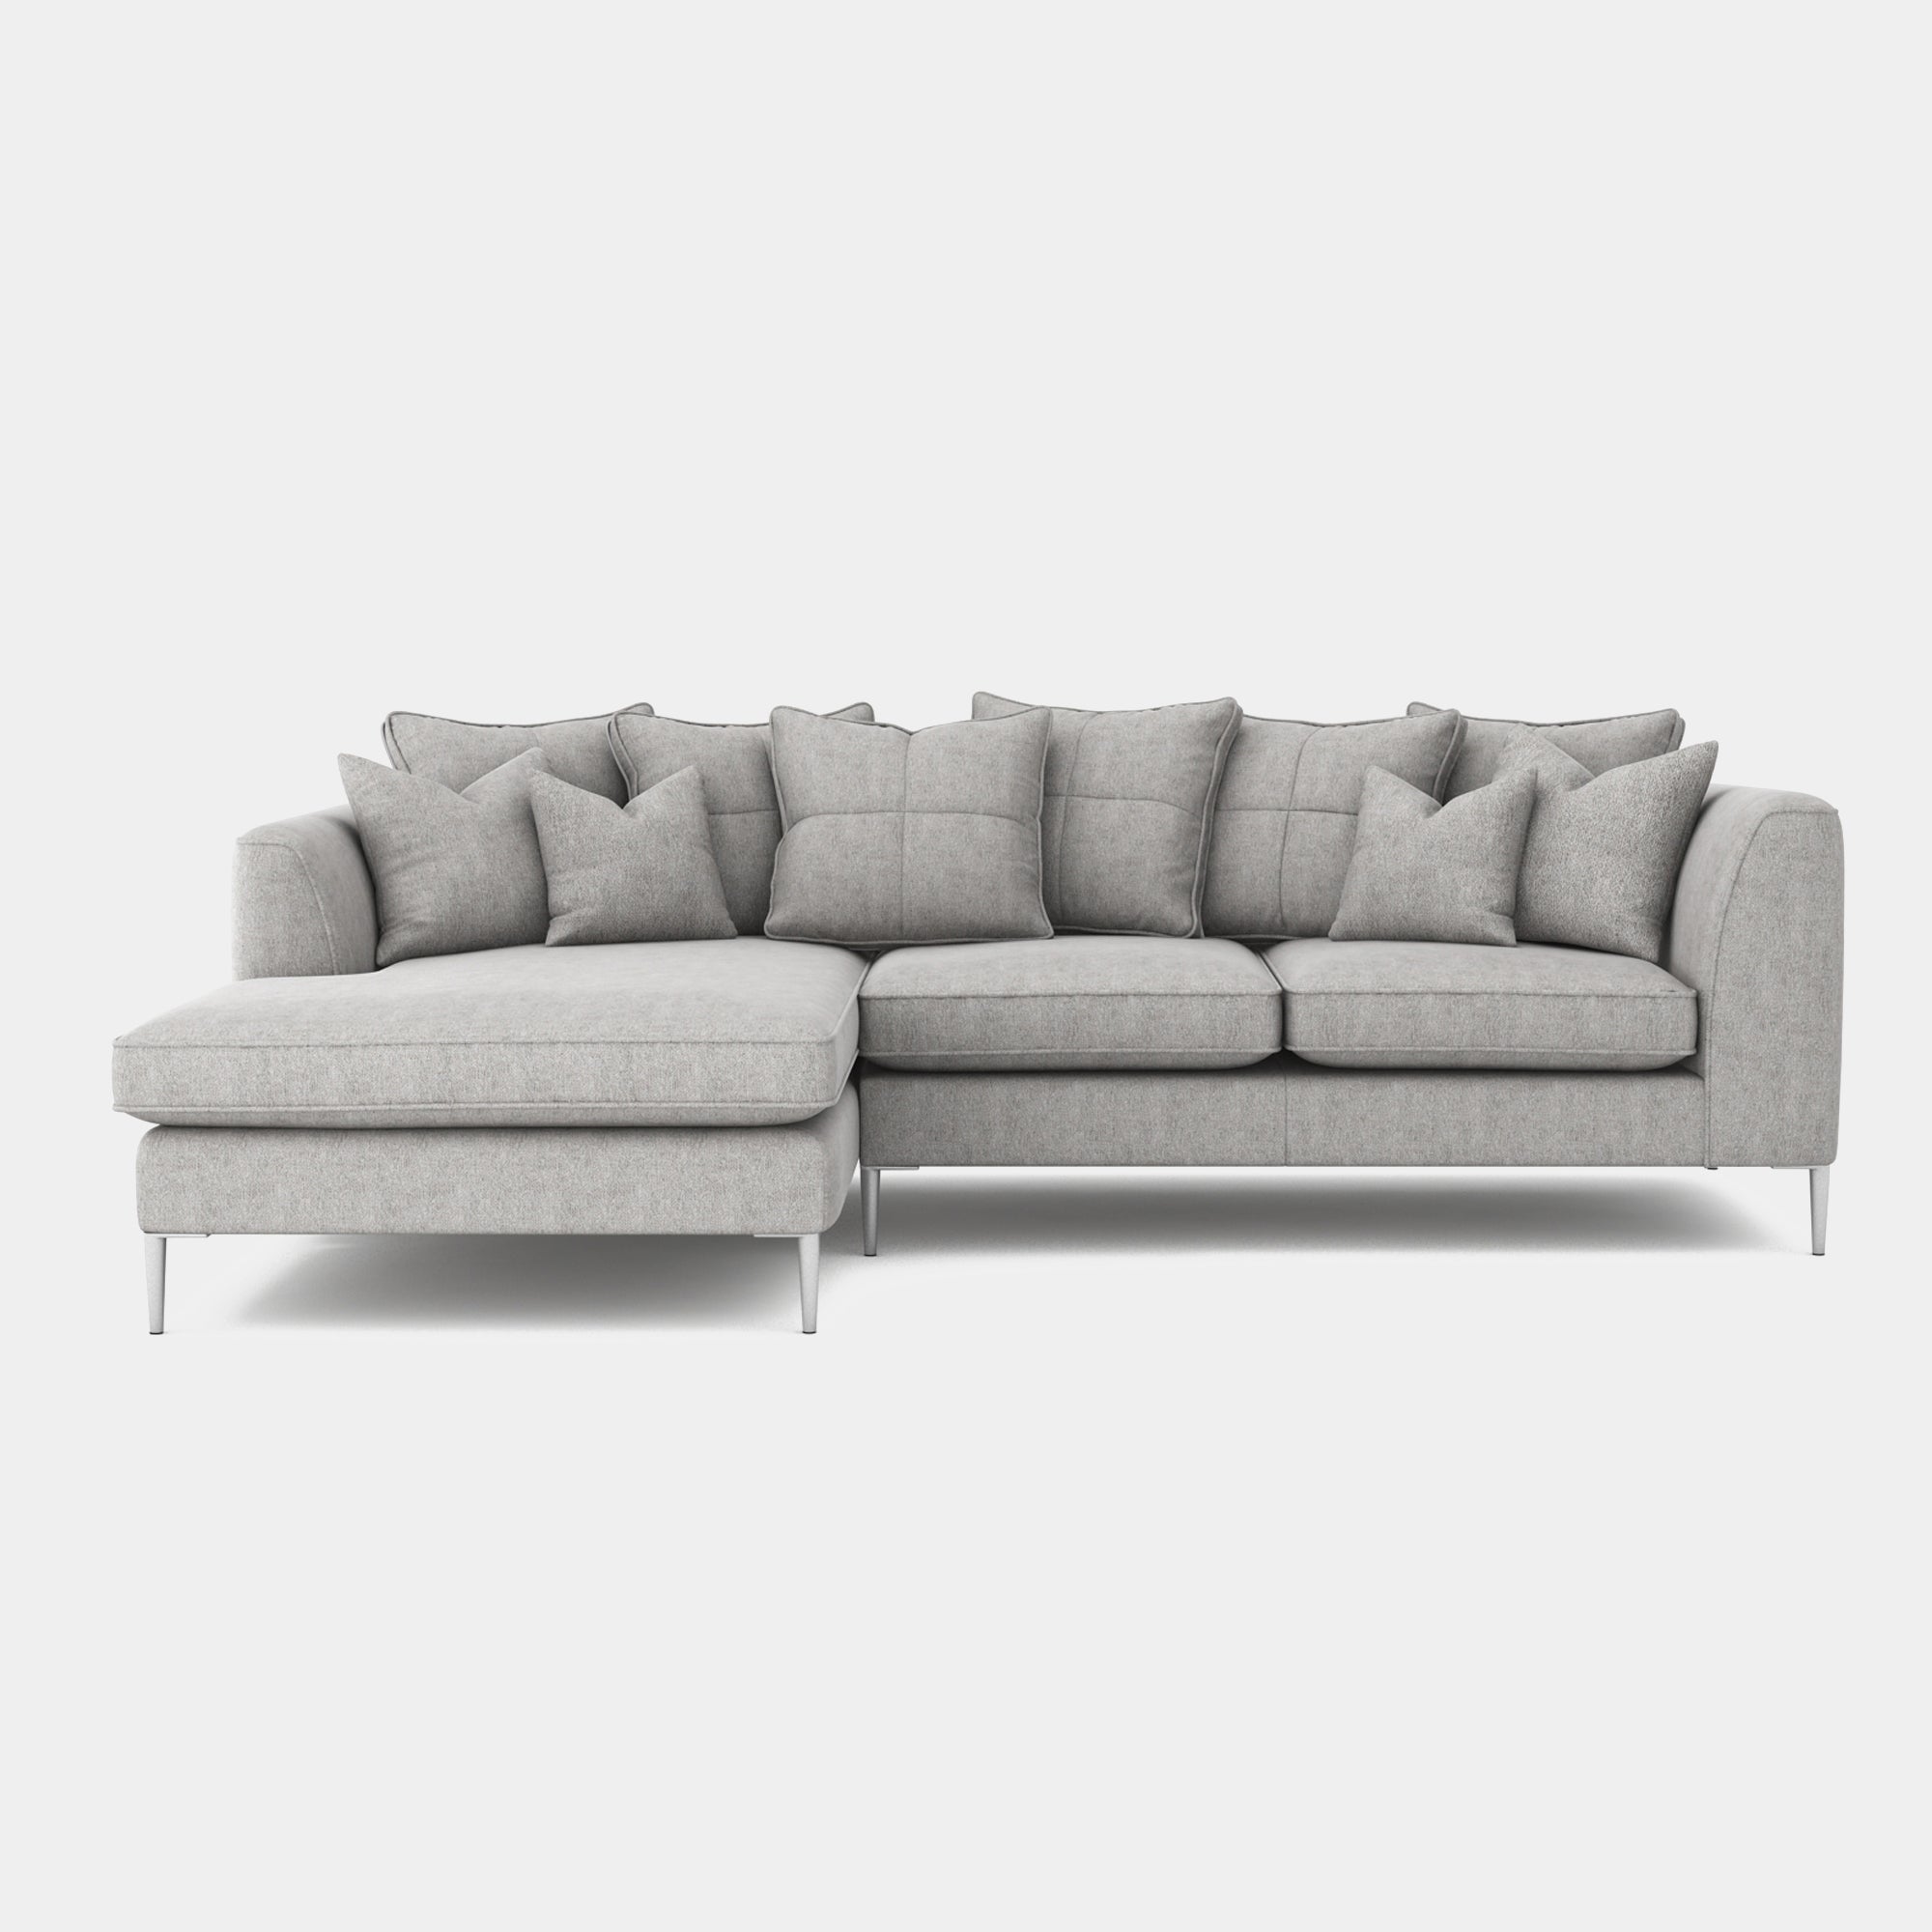 Colorado - Pillow Back Small Chaise Sofa LHF Chaise With 3 Seat 1 Arm RHF In Grade B Fabric